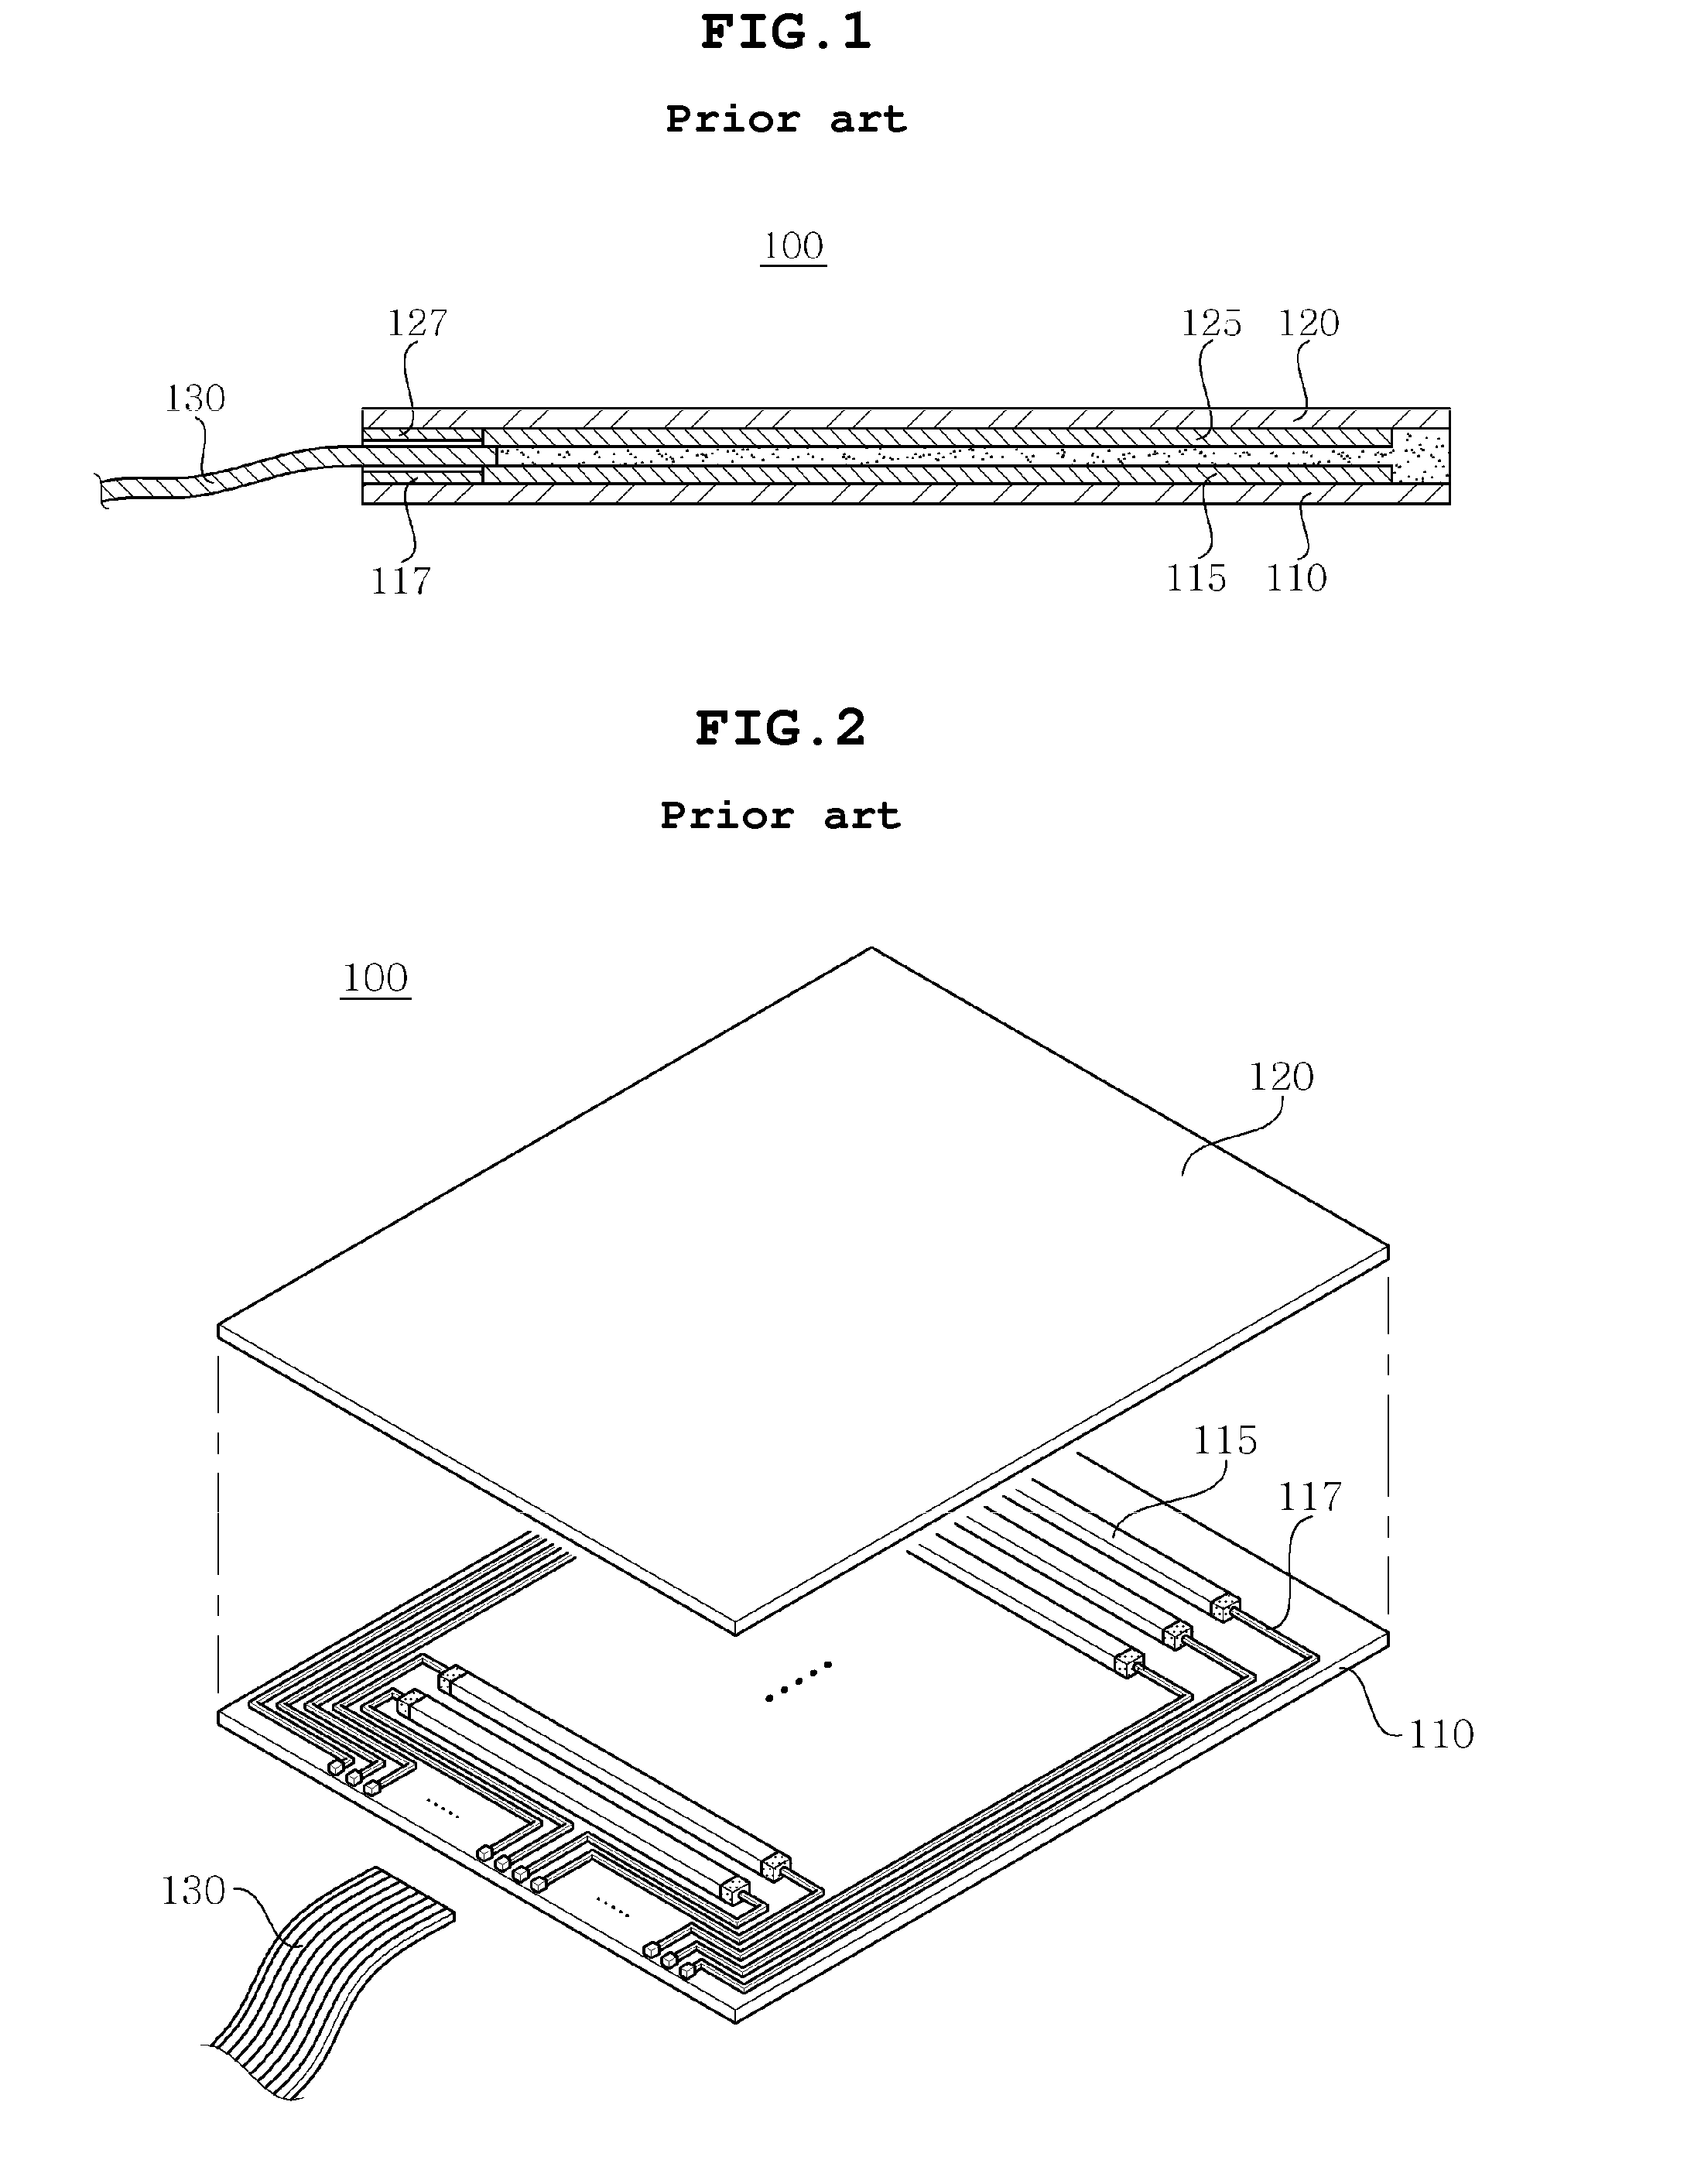 Display device including touch panel